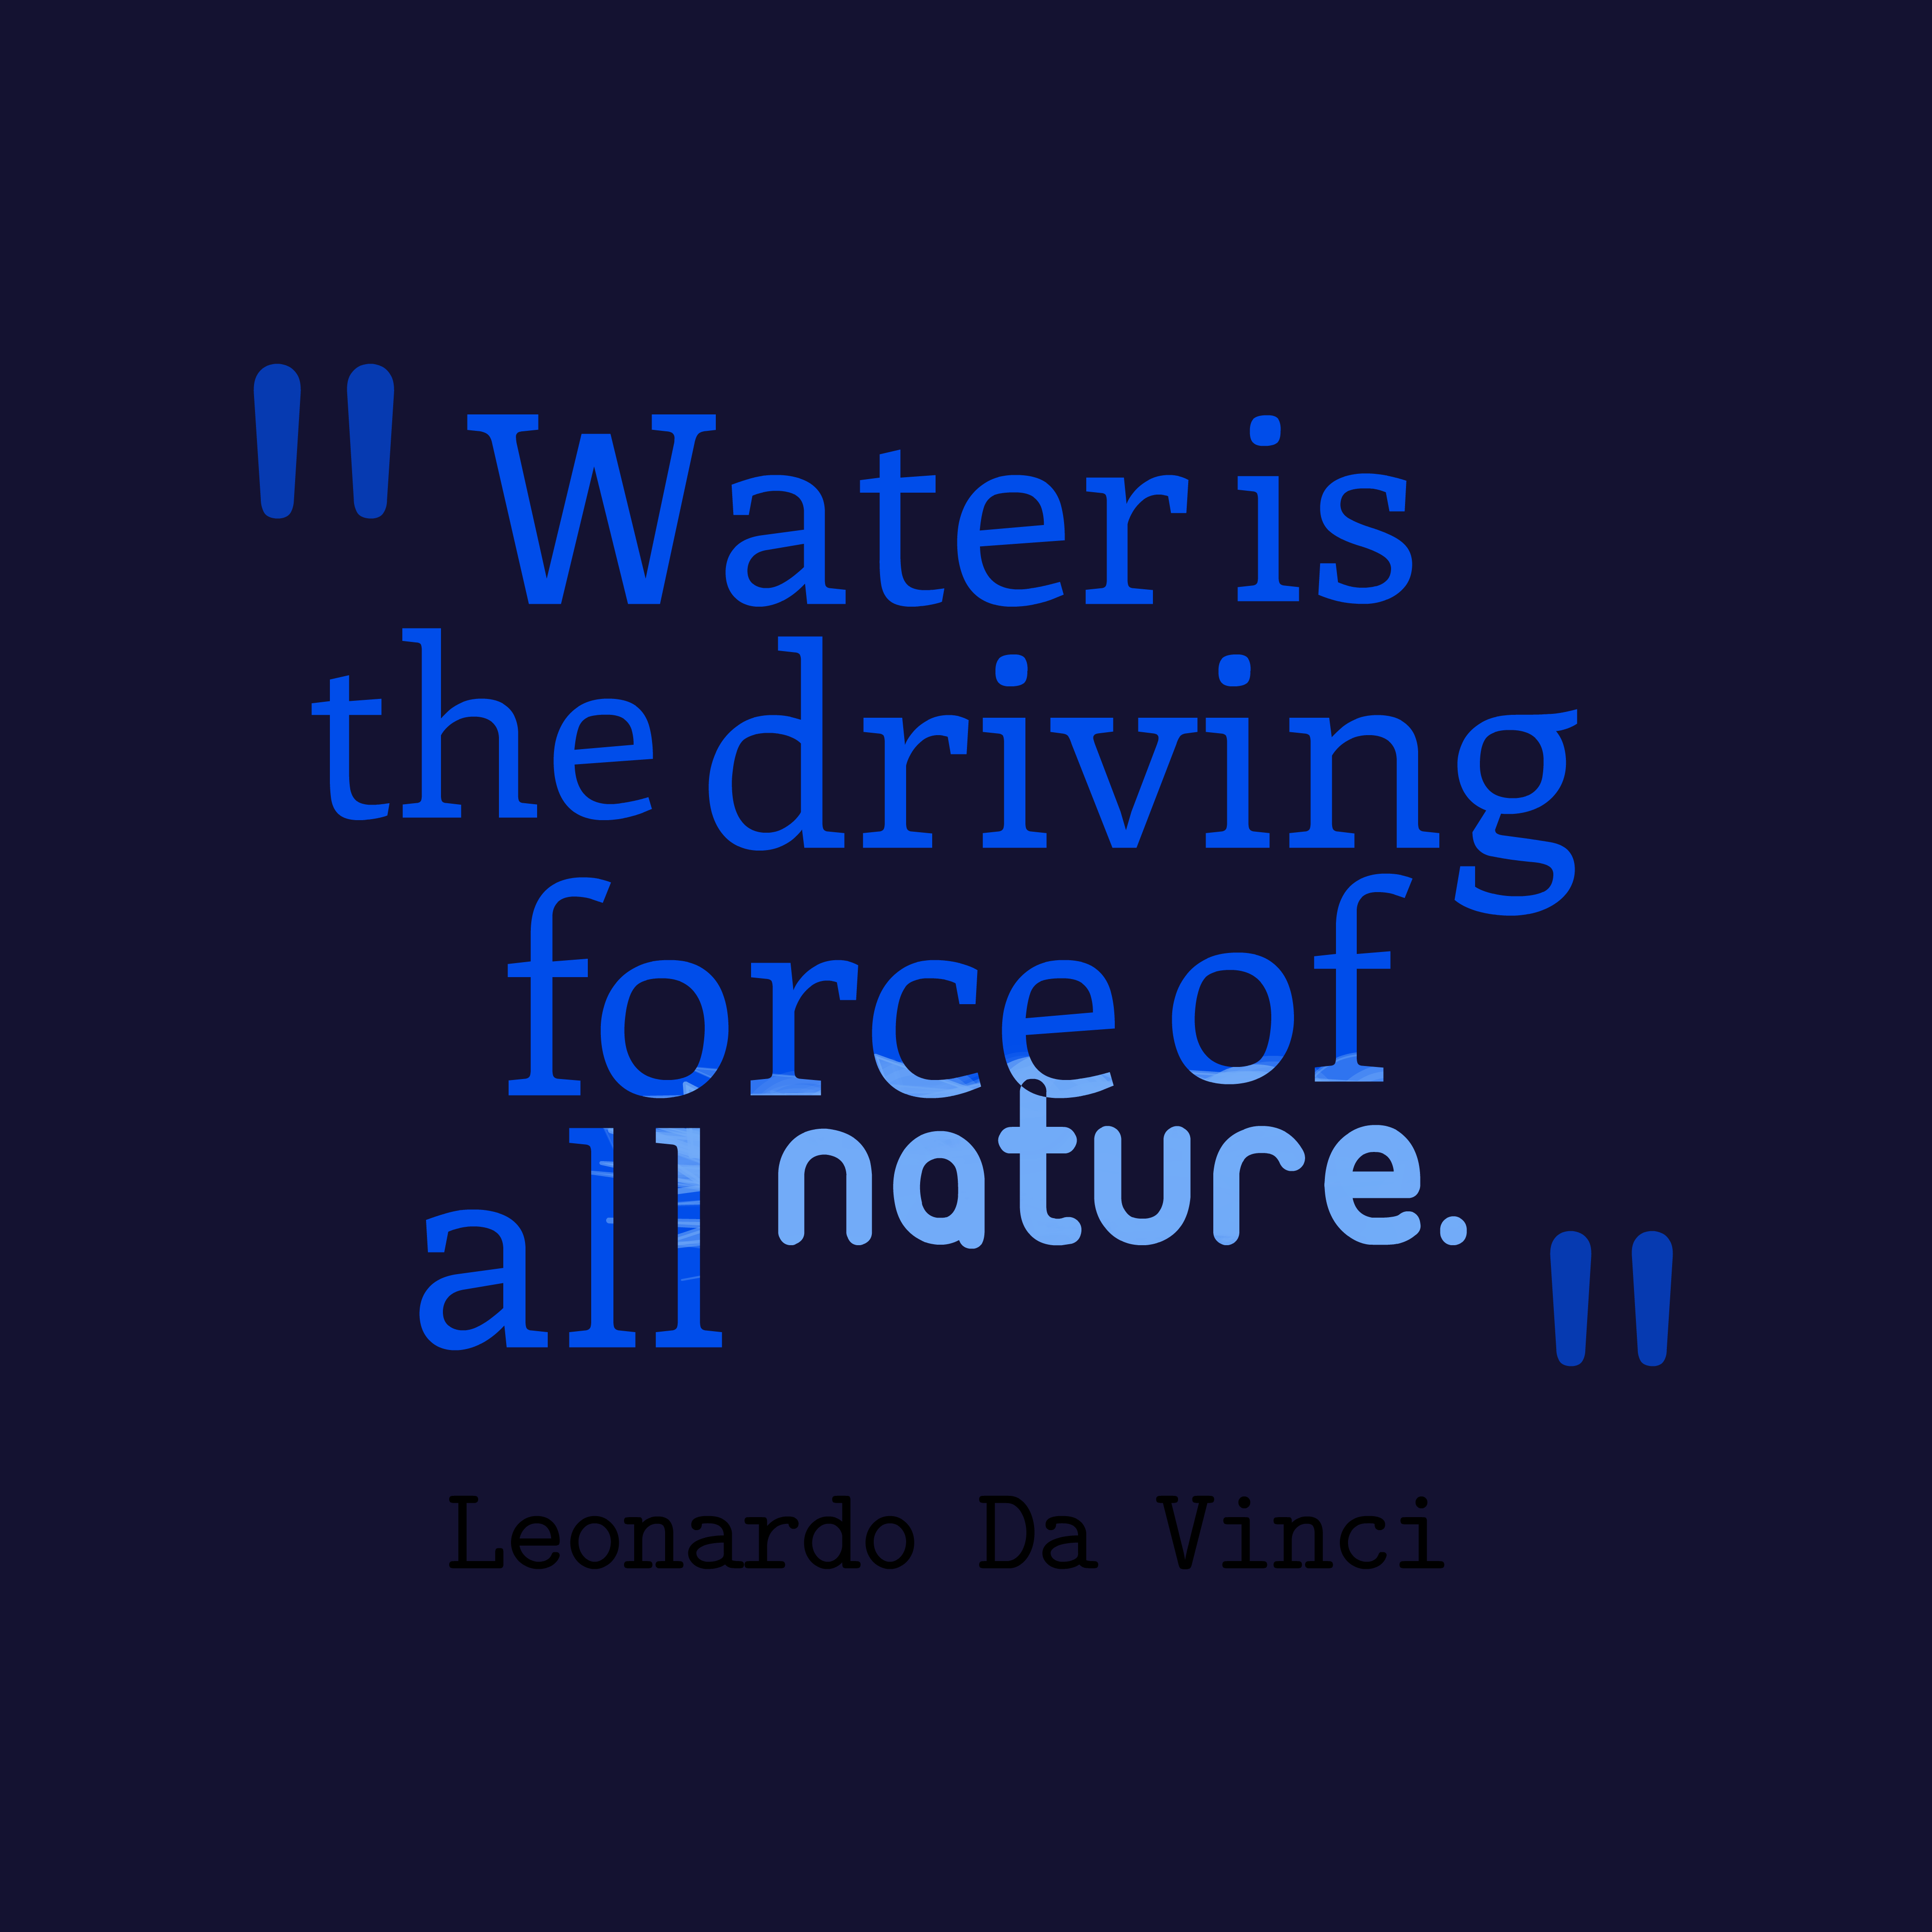 Image Water is the driving force of all nature